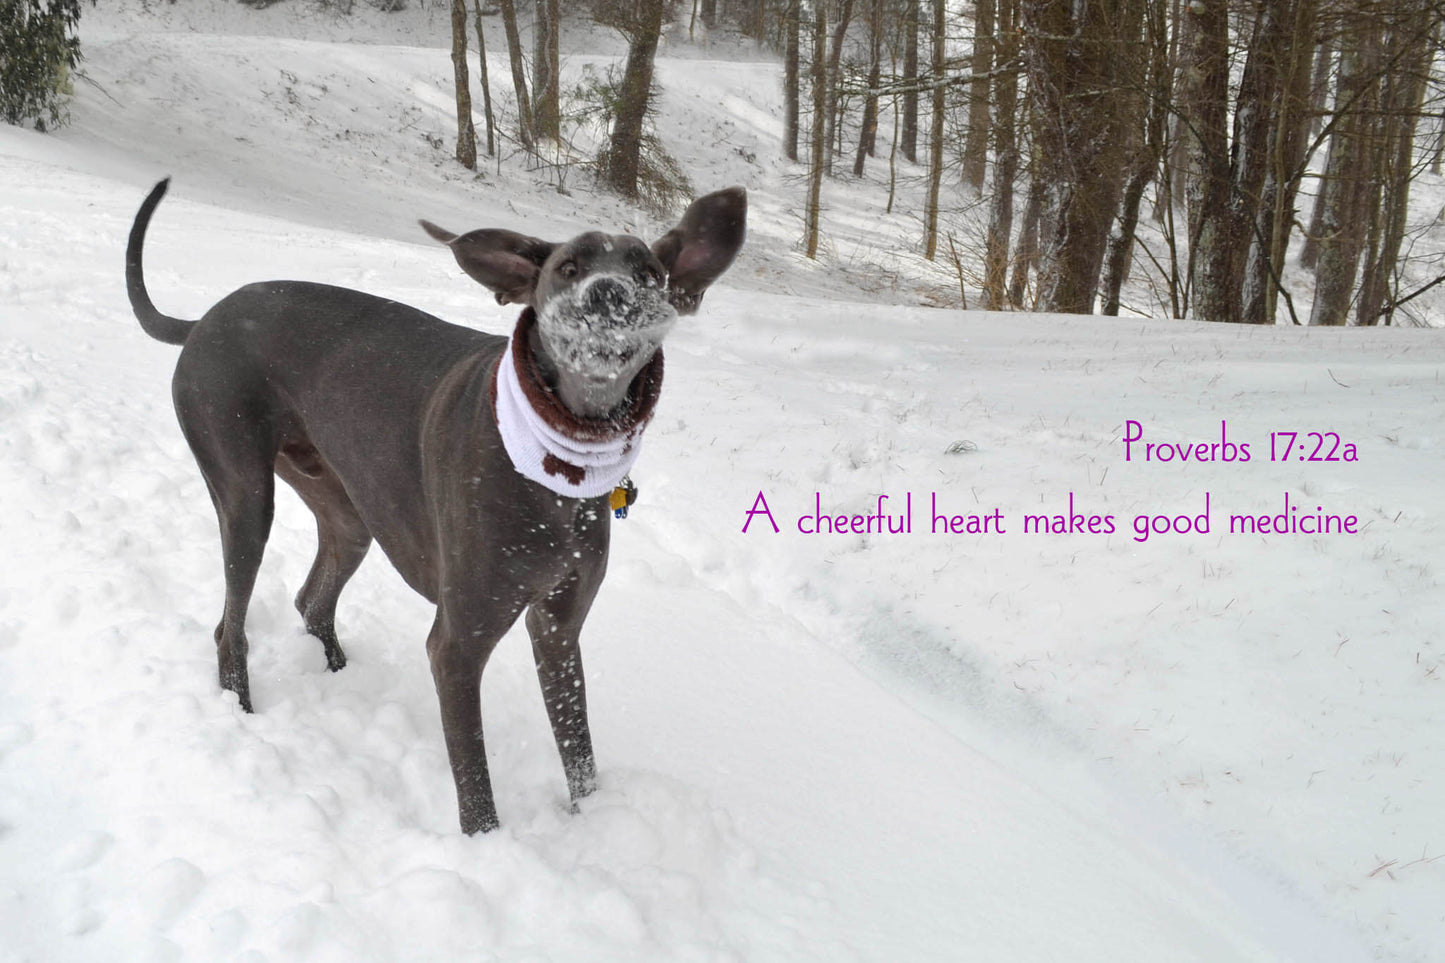 Proverbs 17:22a Goofy Snowy Puddles